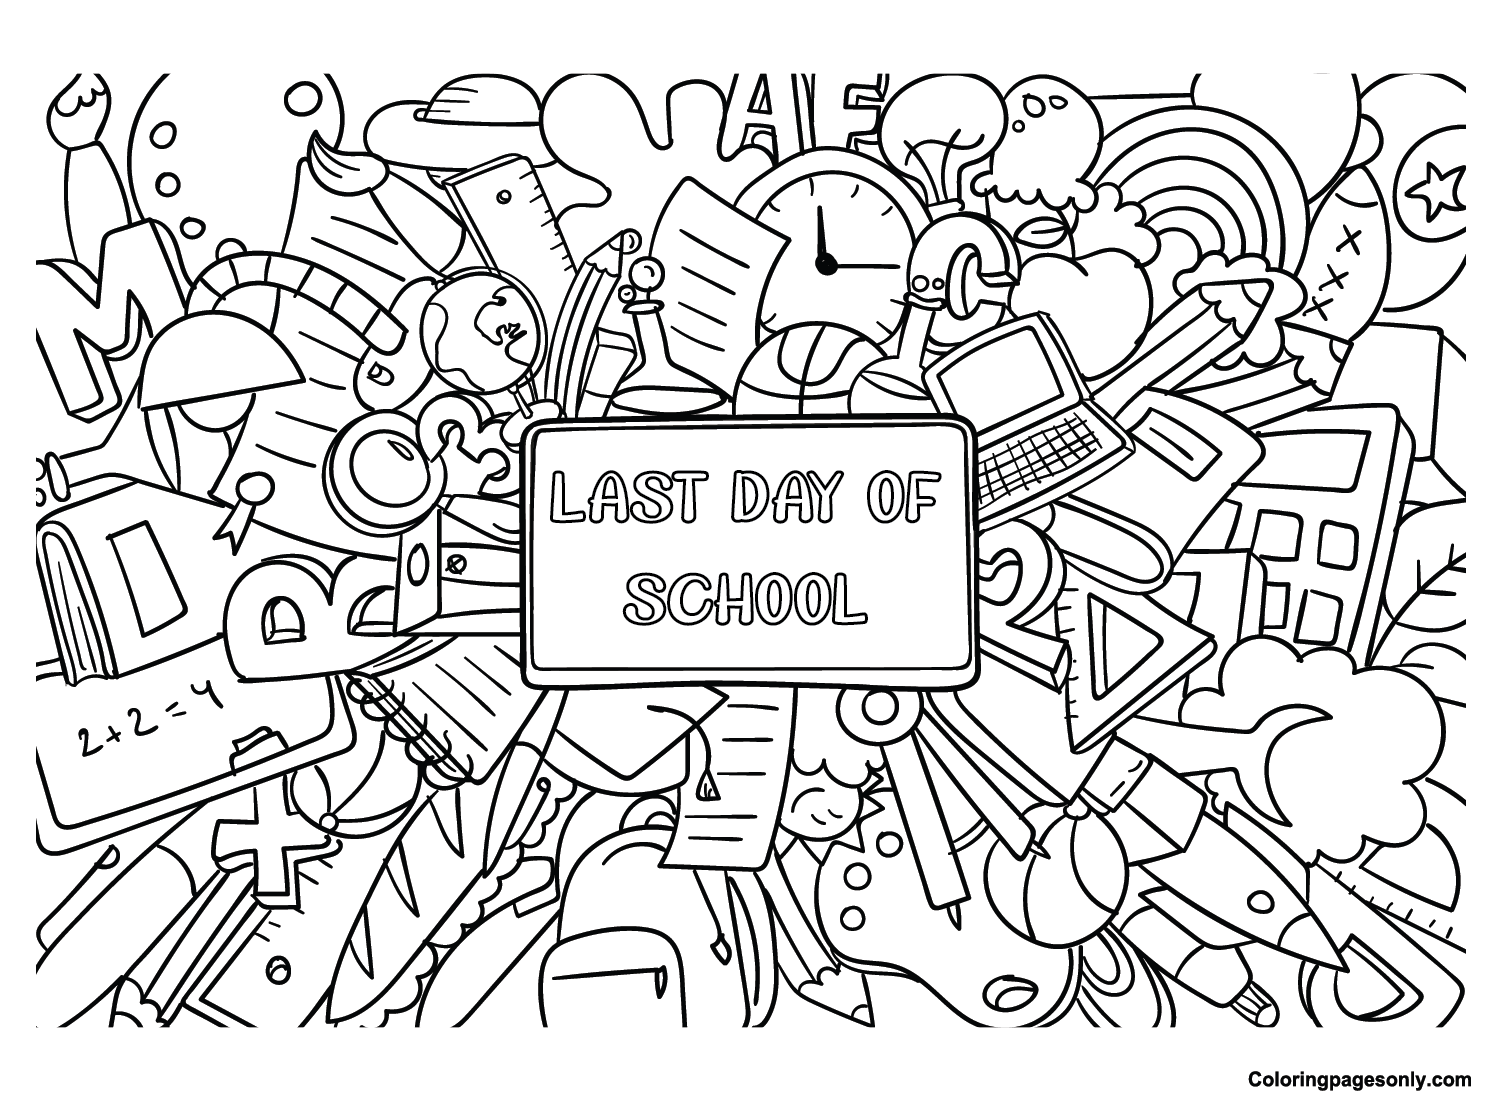 last-day-of-school-coloring-pages-printable-for-free-download